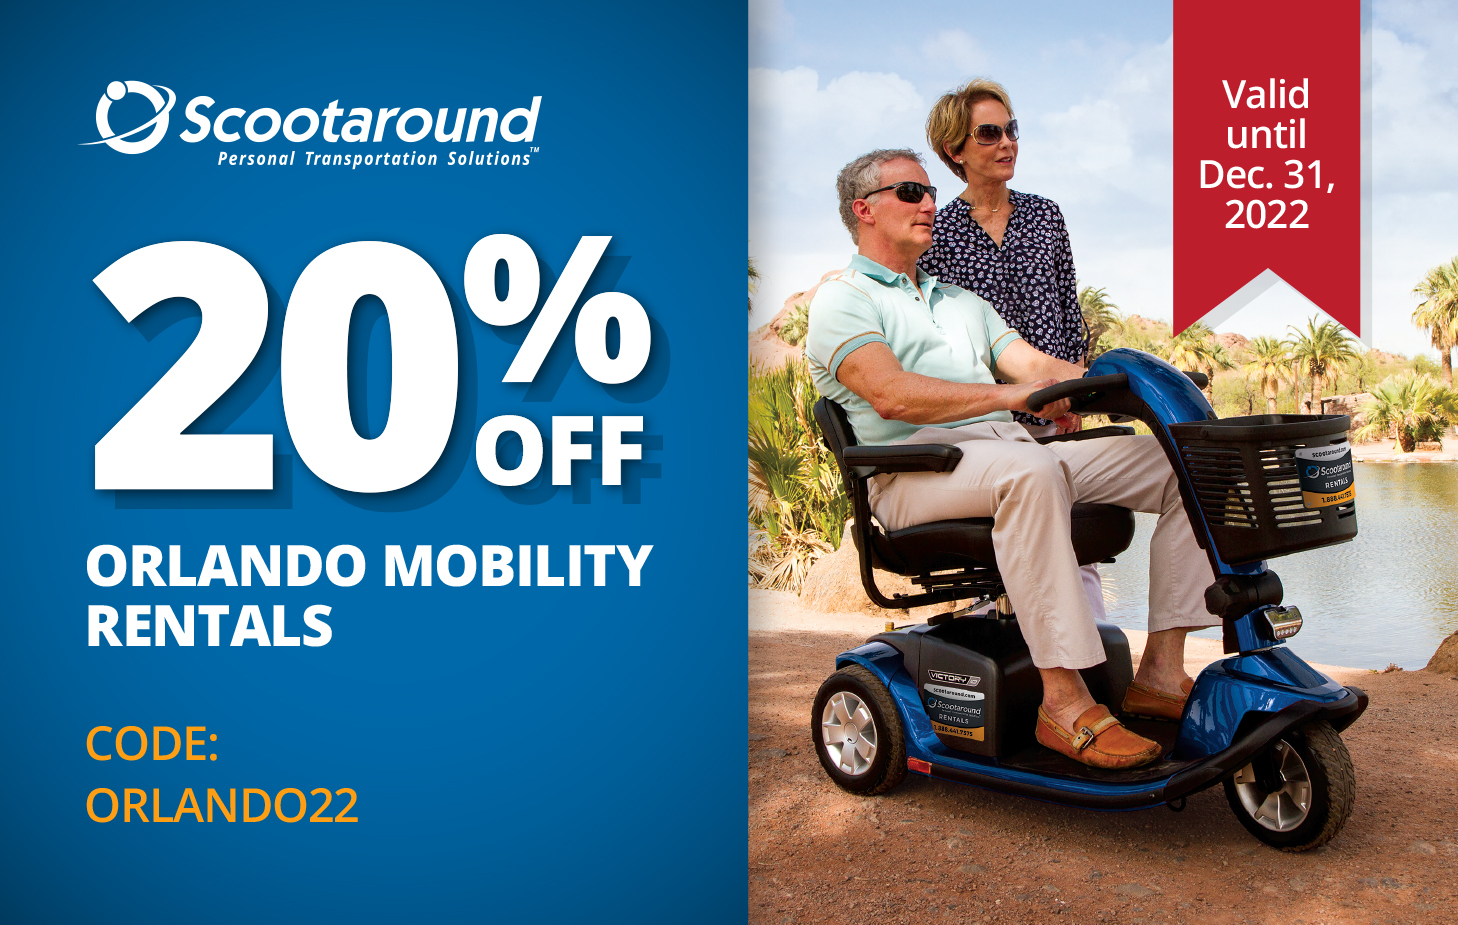 Save 20% on Mobility Rentals in Orlando